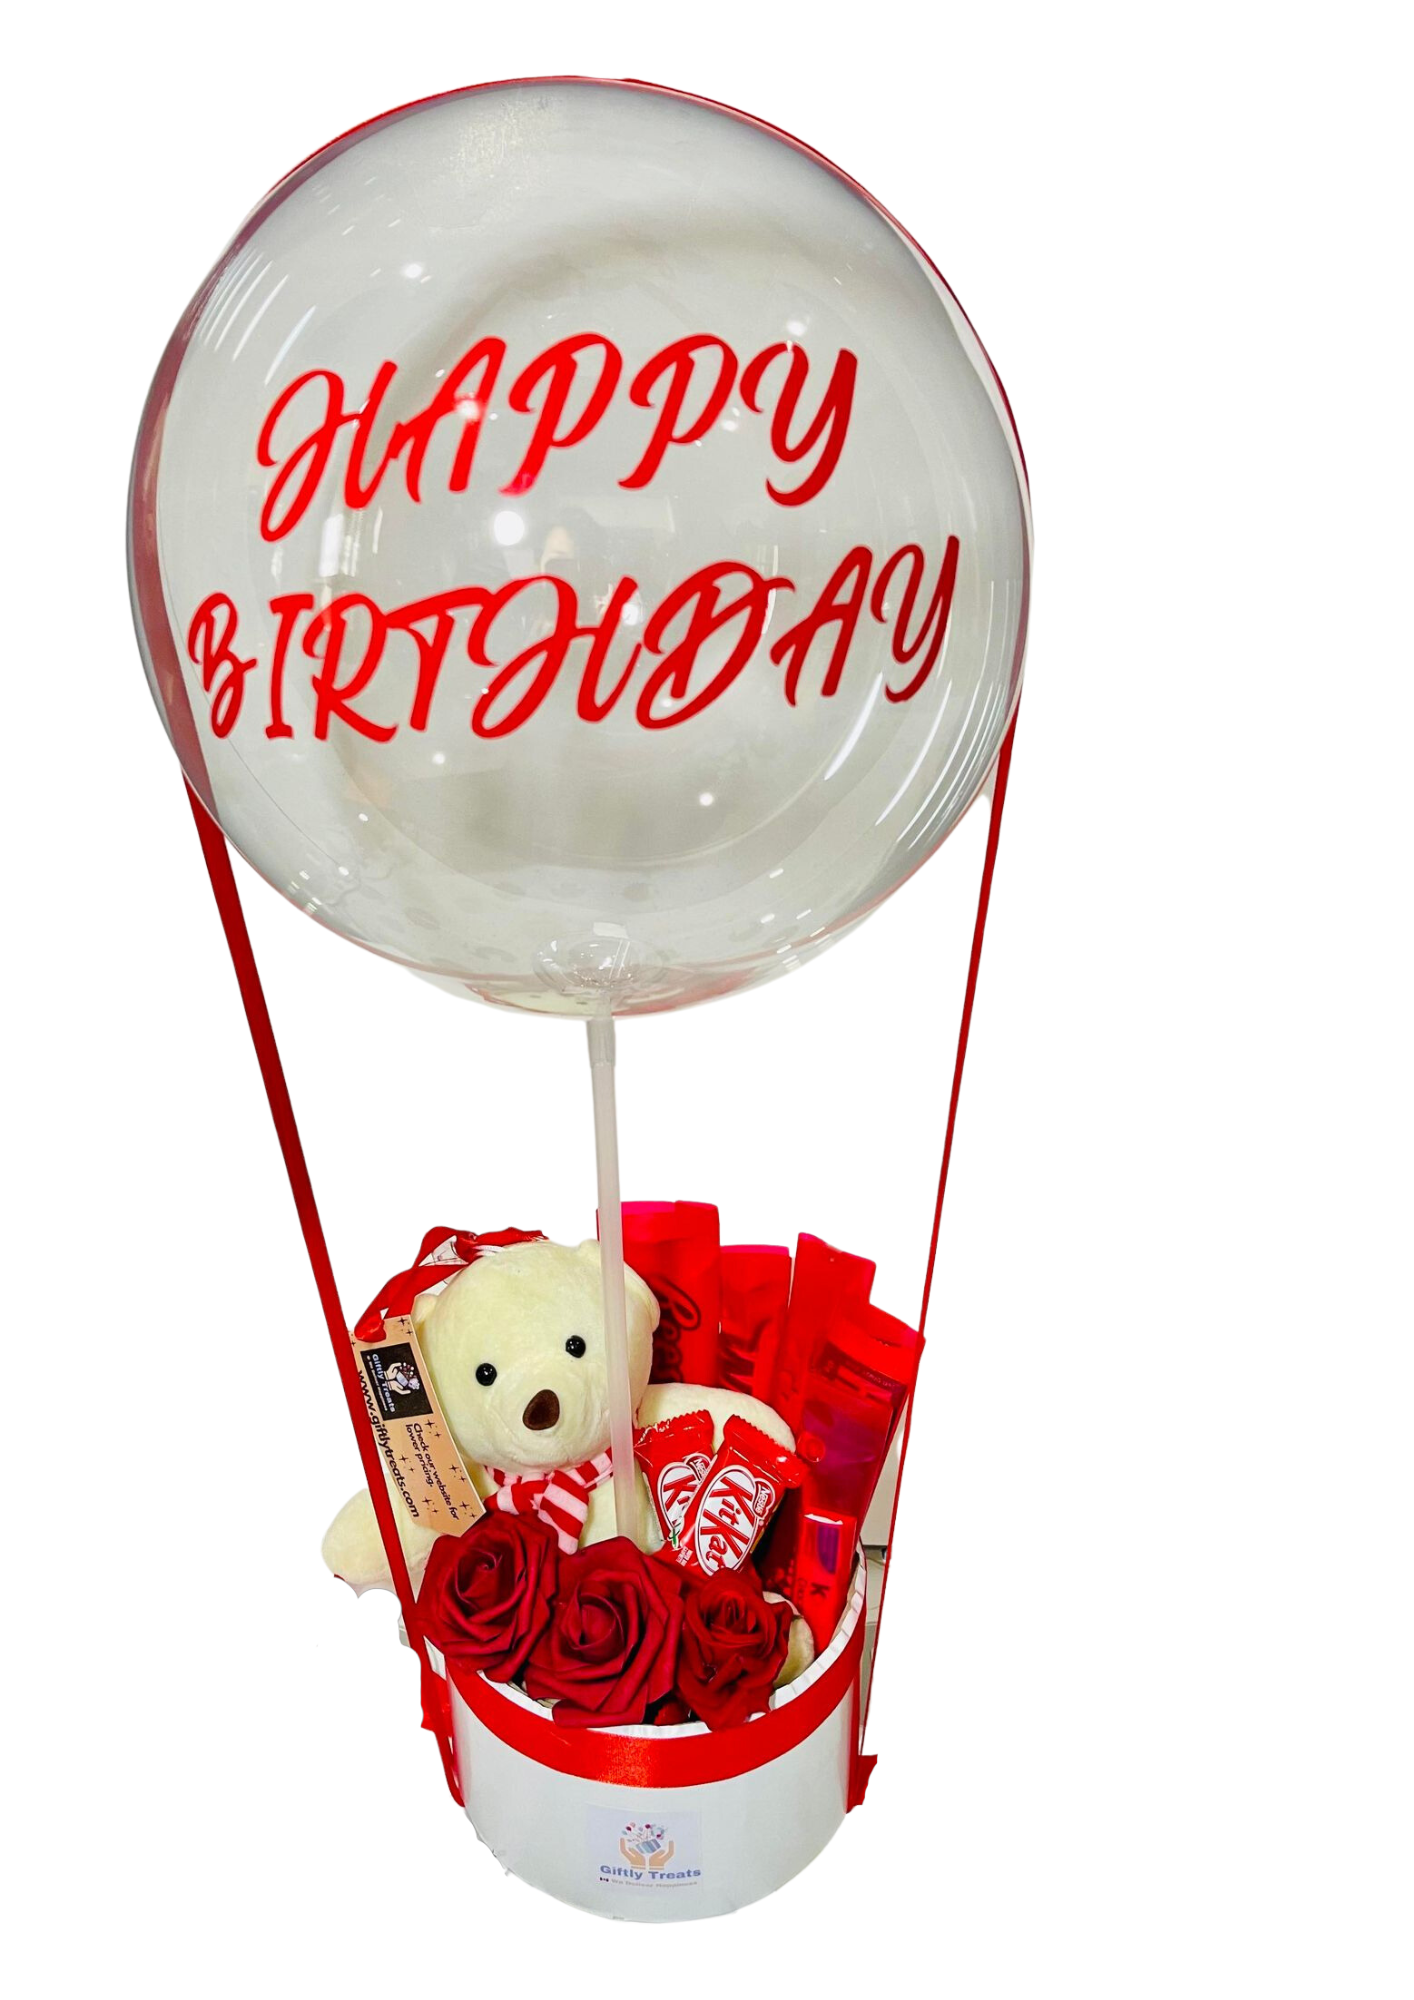 Birthday Gift for her. Teddy Bear, Canadian chocolates sold by giftly treats. 